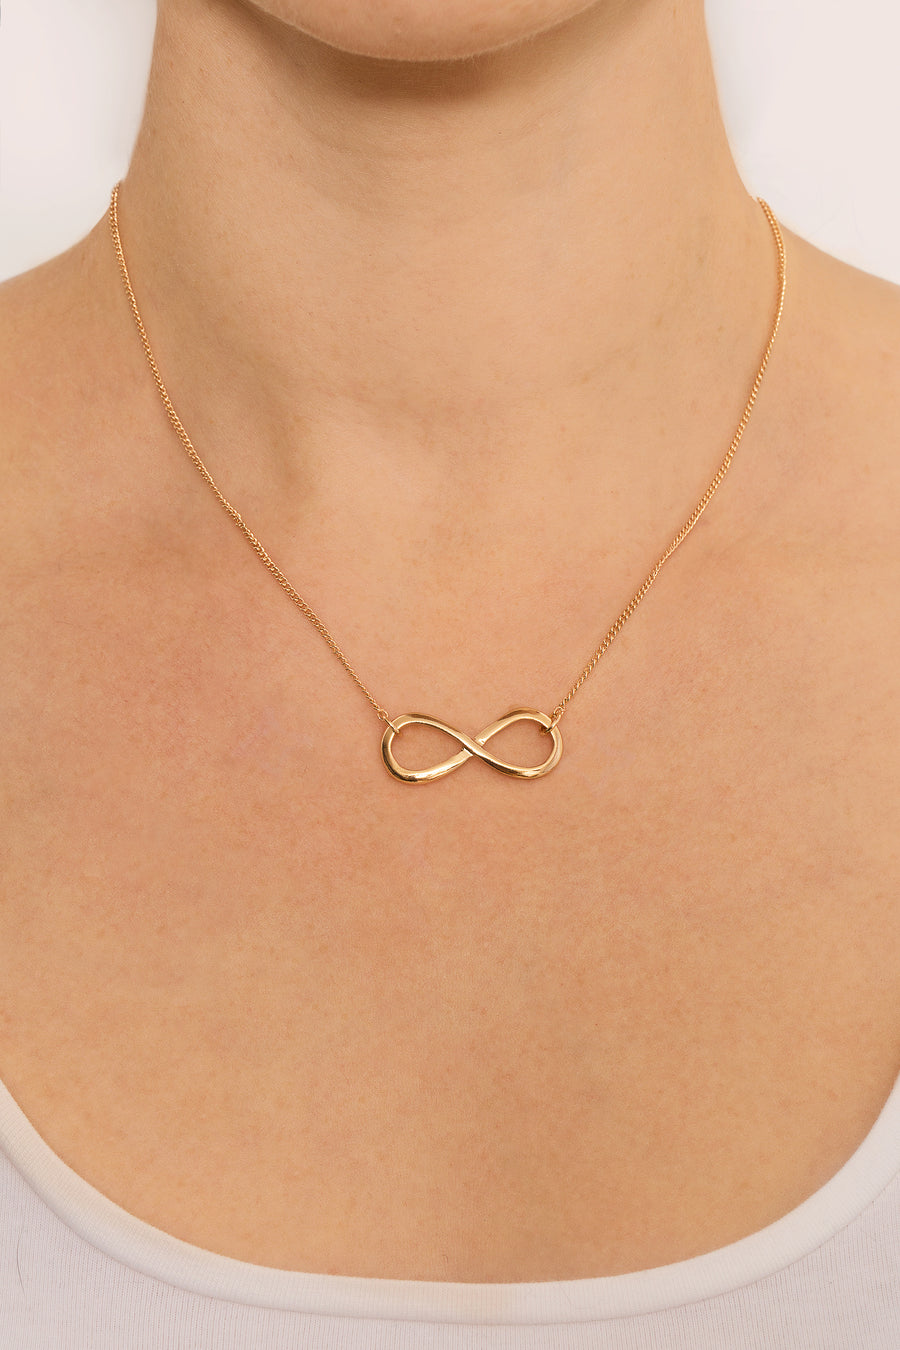 Gold 'Infinity' Friendship Necklace